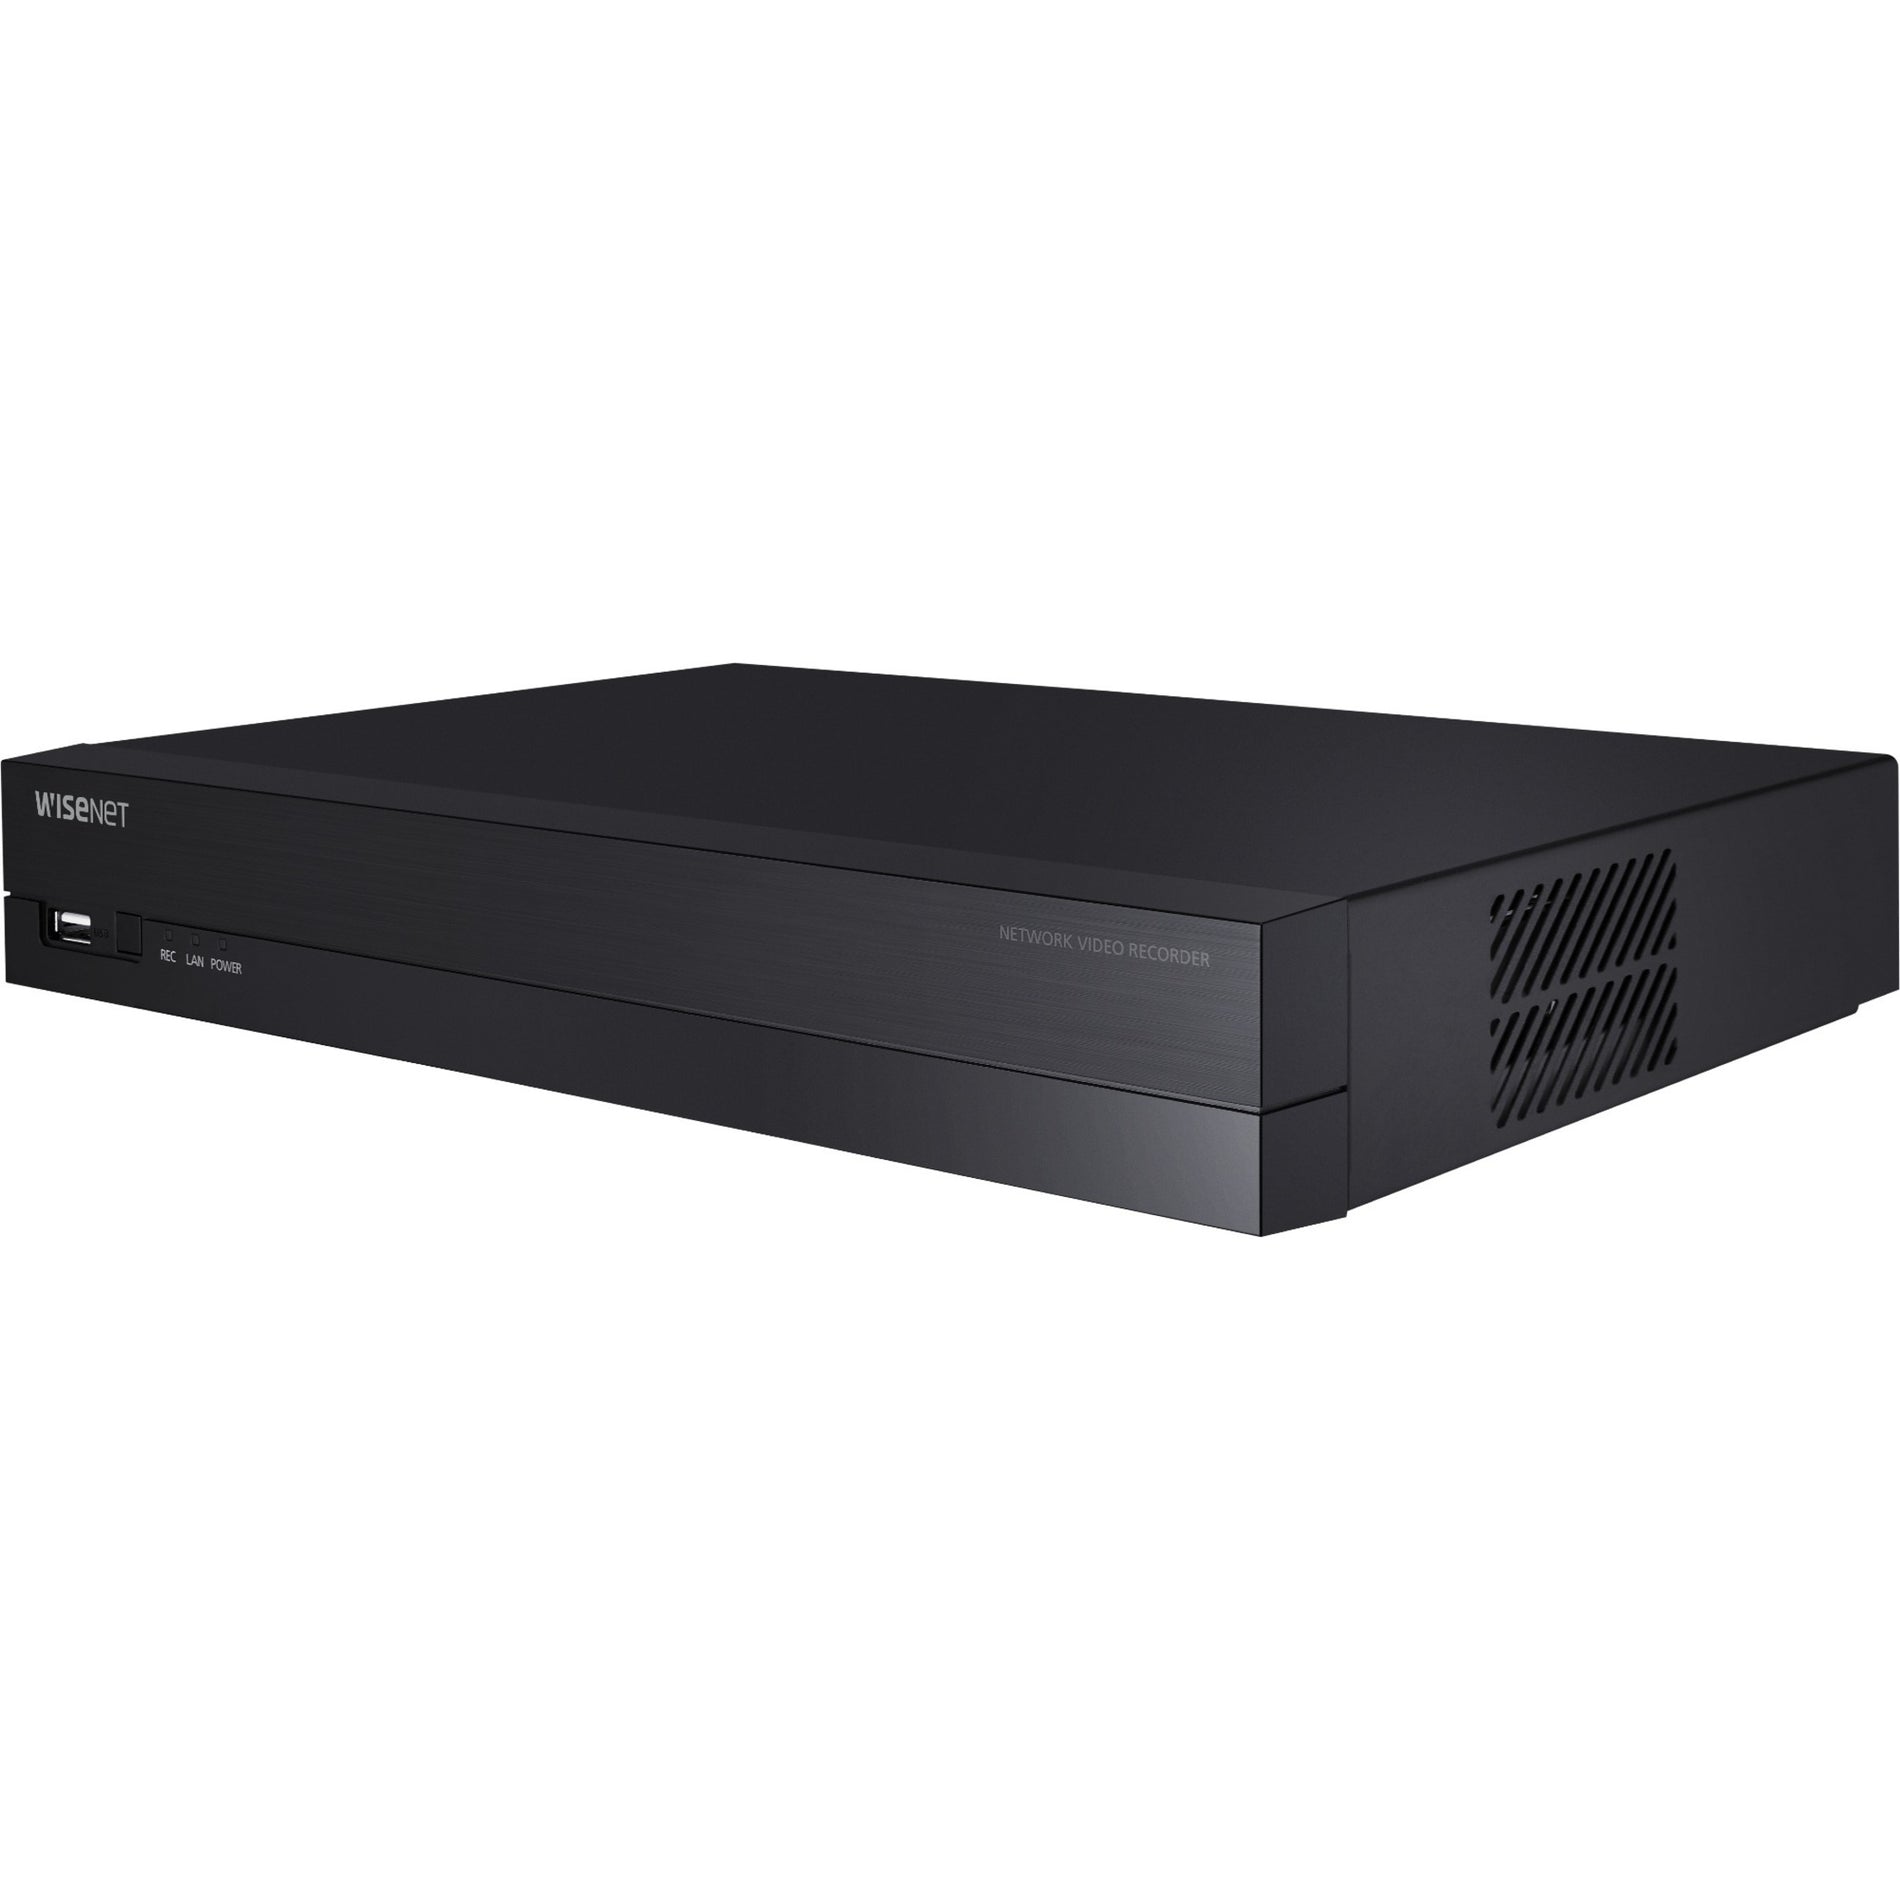 Wisenet XRN-420S 4 Channel NVR - Network Video Recorder, HDMI, H.264, Motion JPEG, H.265, 8MP, 120 fps